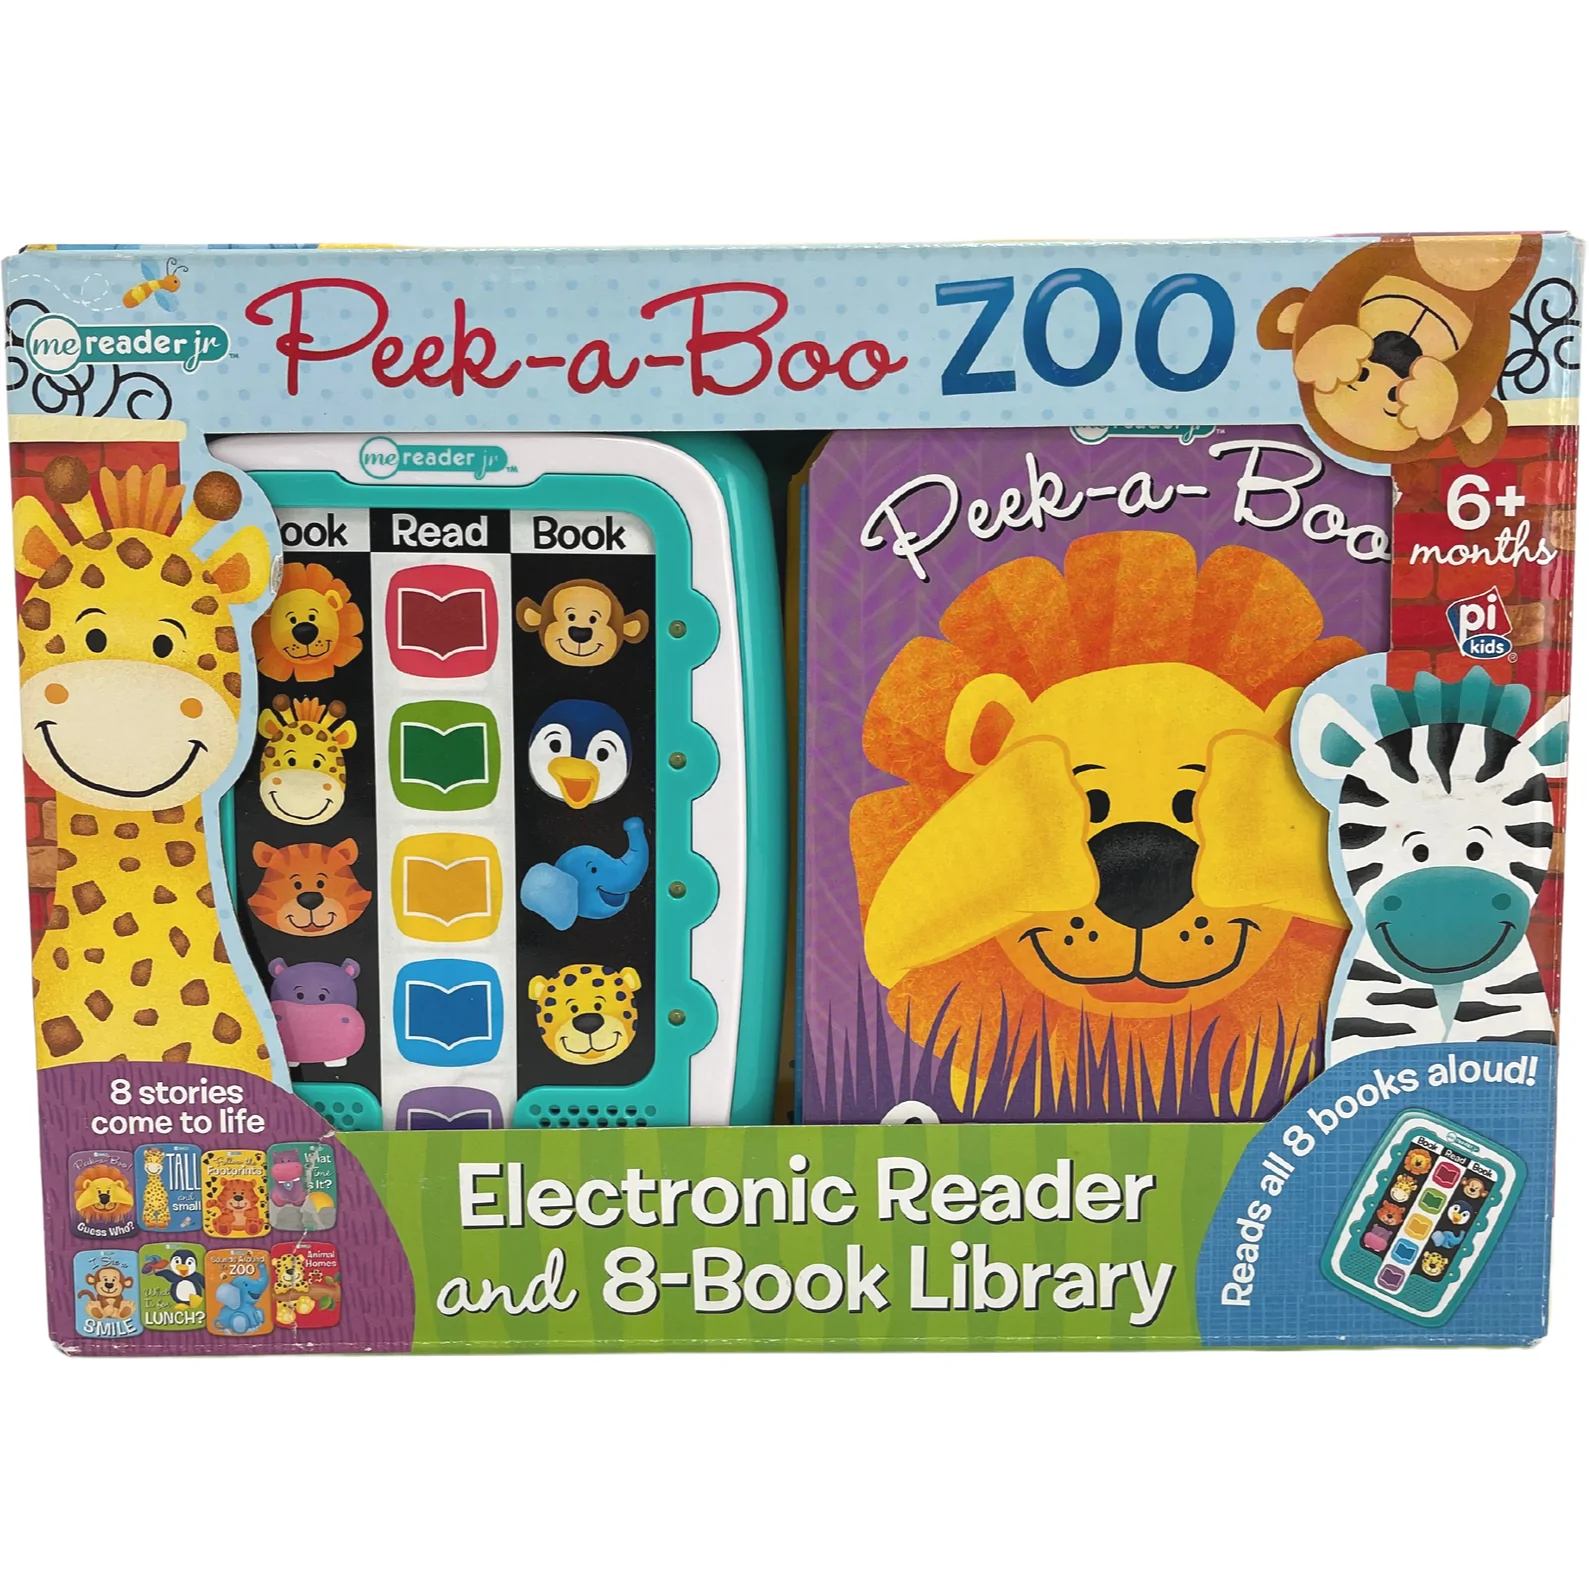 Me Reader Jr. Peek-A-Boo Zoo E-Reader / Electronic Reader and 8 Book Library / Early Learning Tool